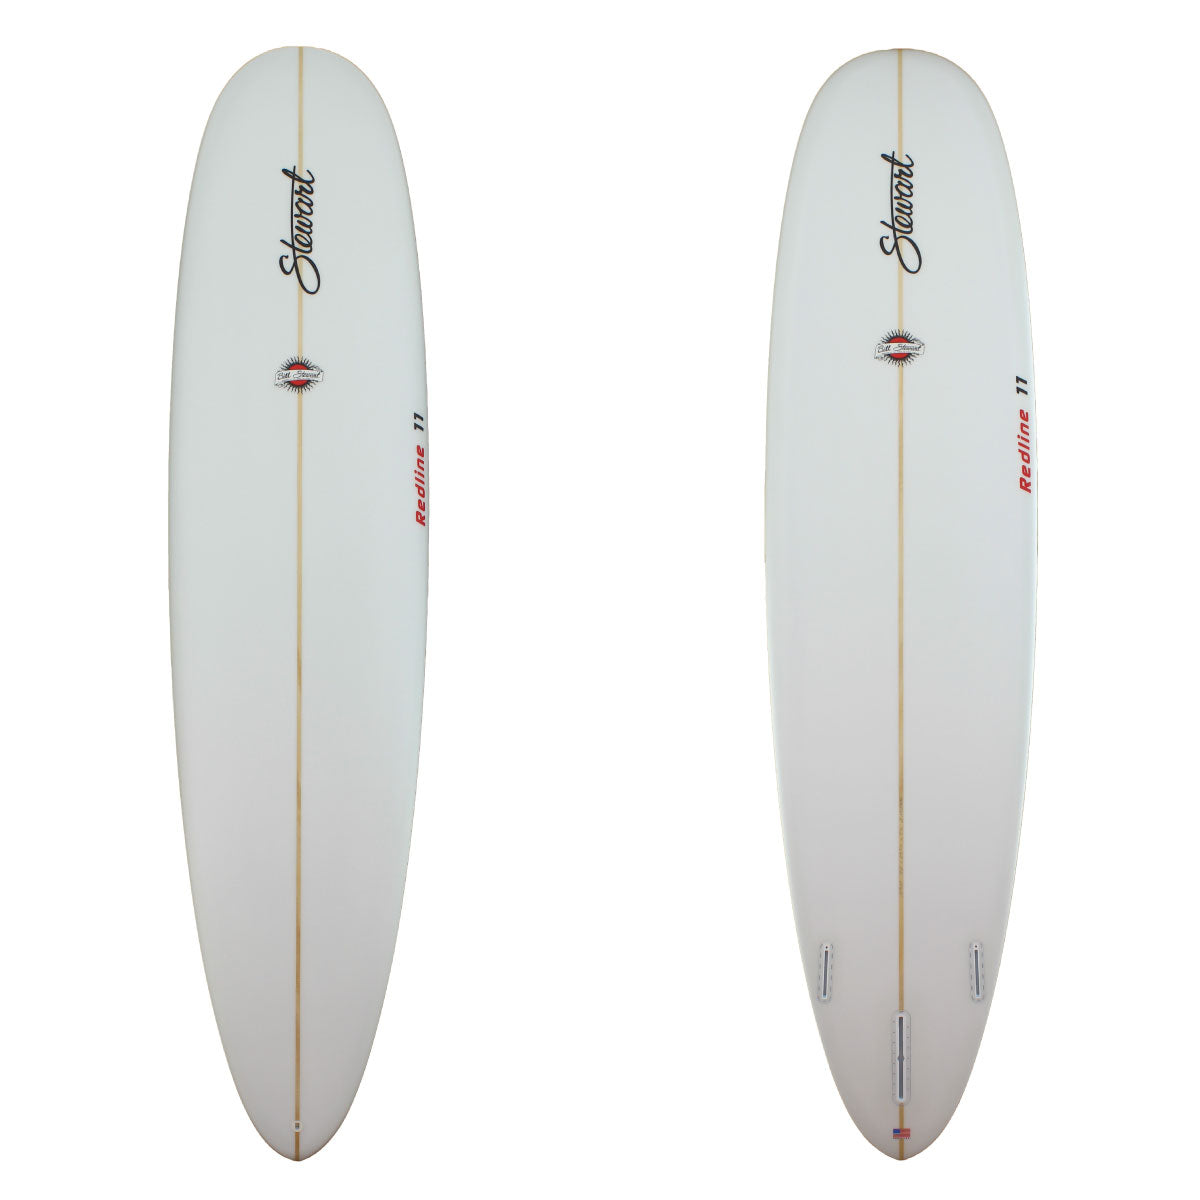 Sand Finish Clear with red logos 9'0" Redline 11 (9'0", 23 3/4", 3 1/4") B#127527